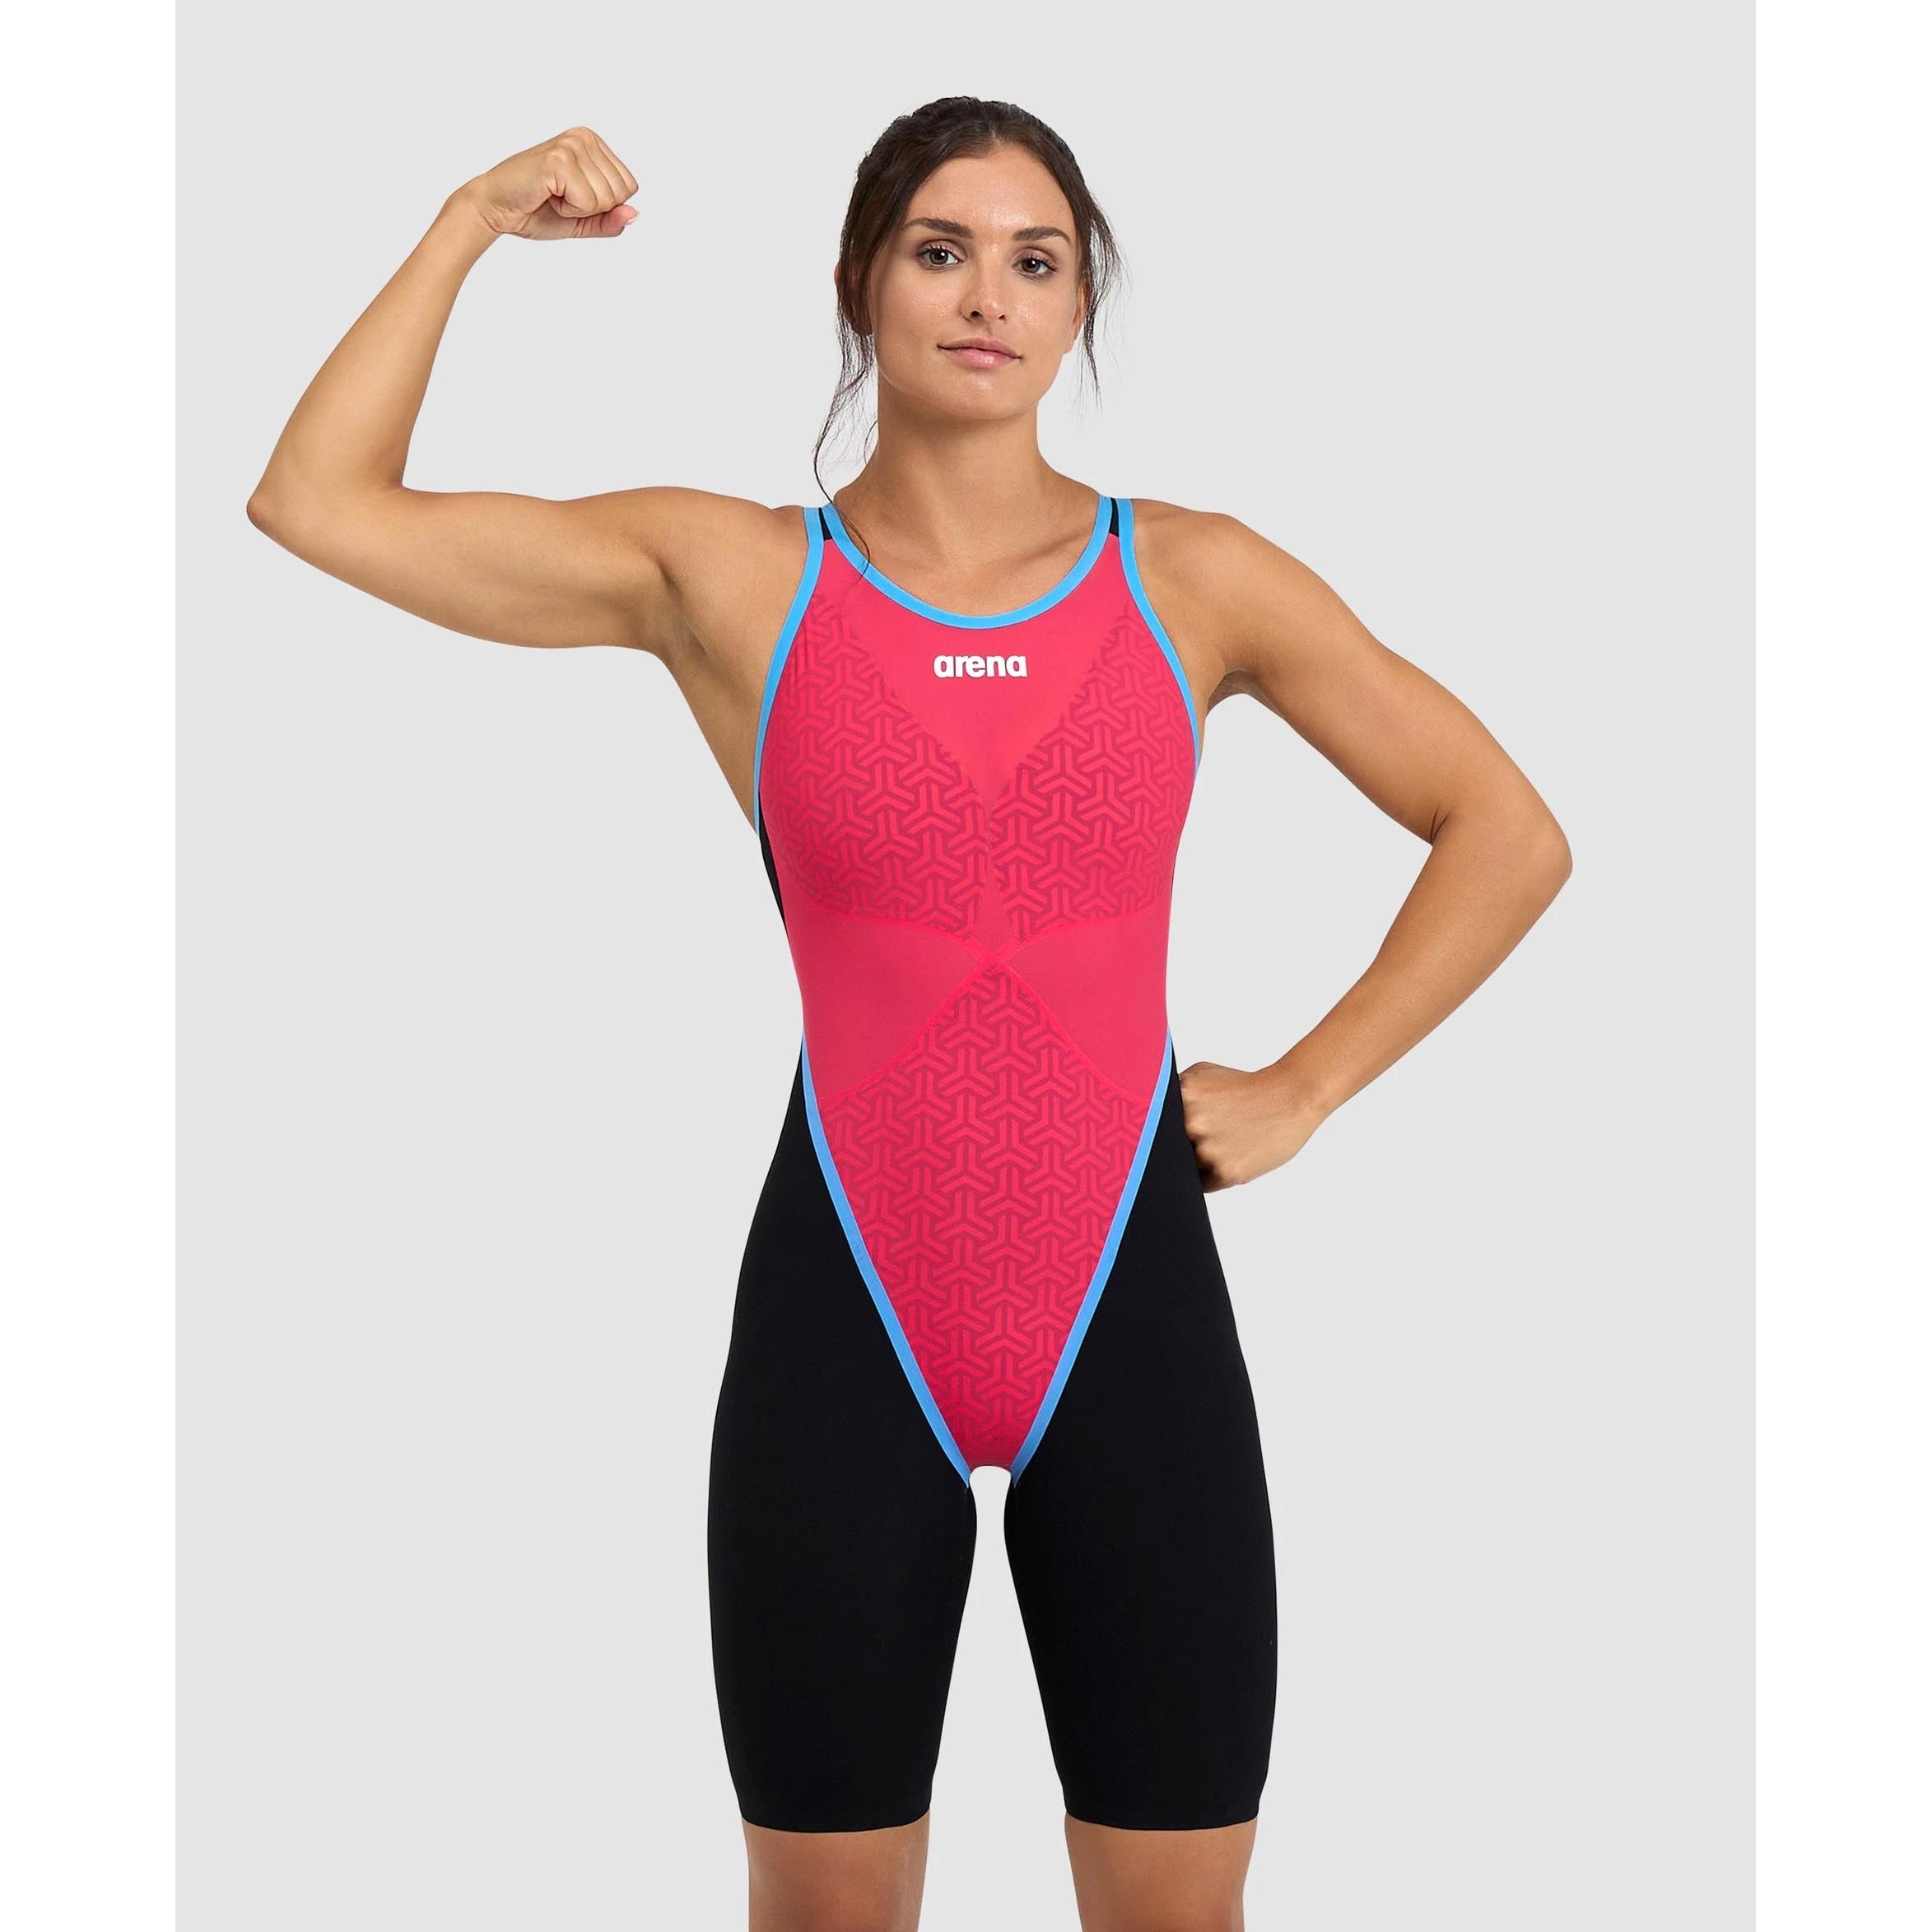 arena - Competition Swimwear, Swimsuits & Gear